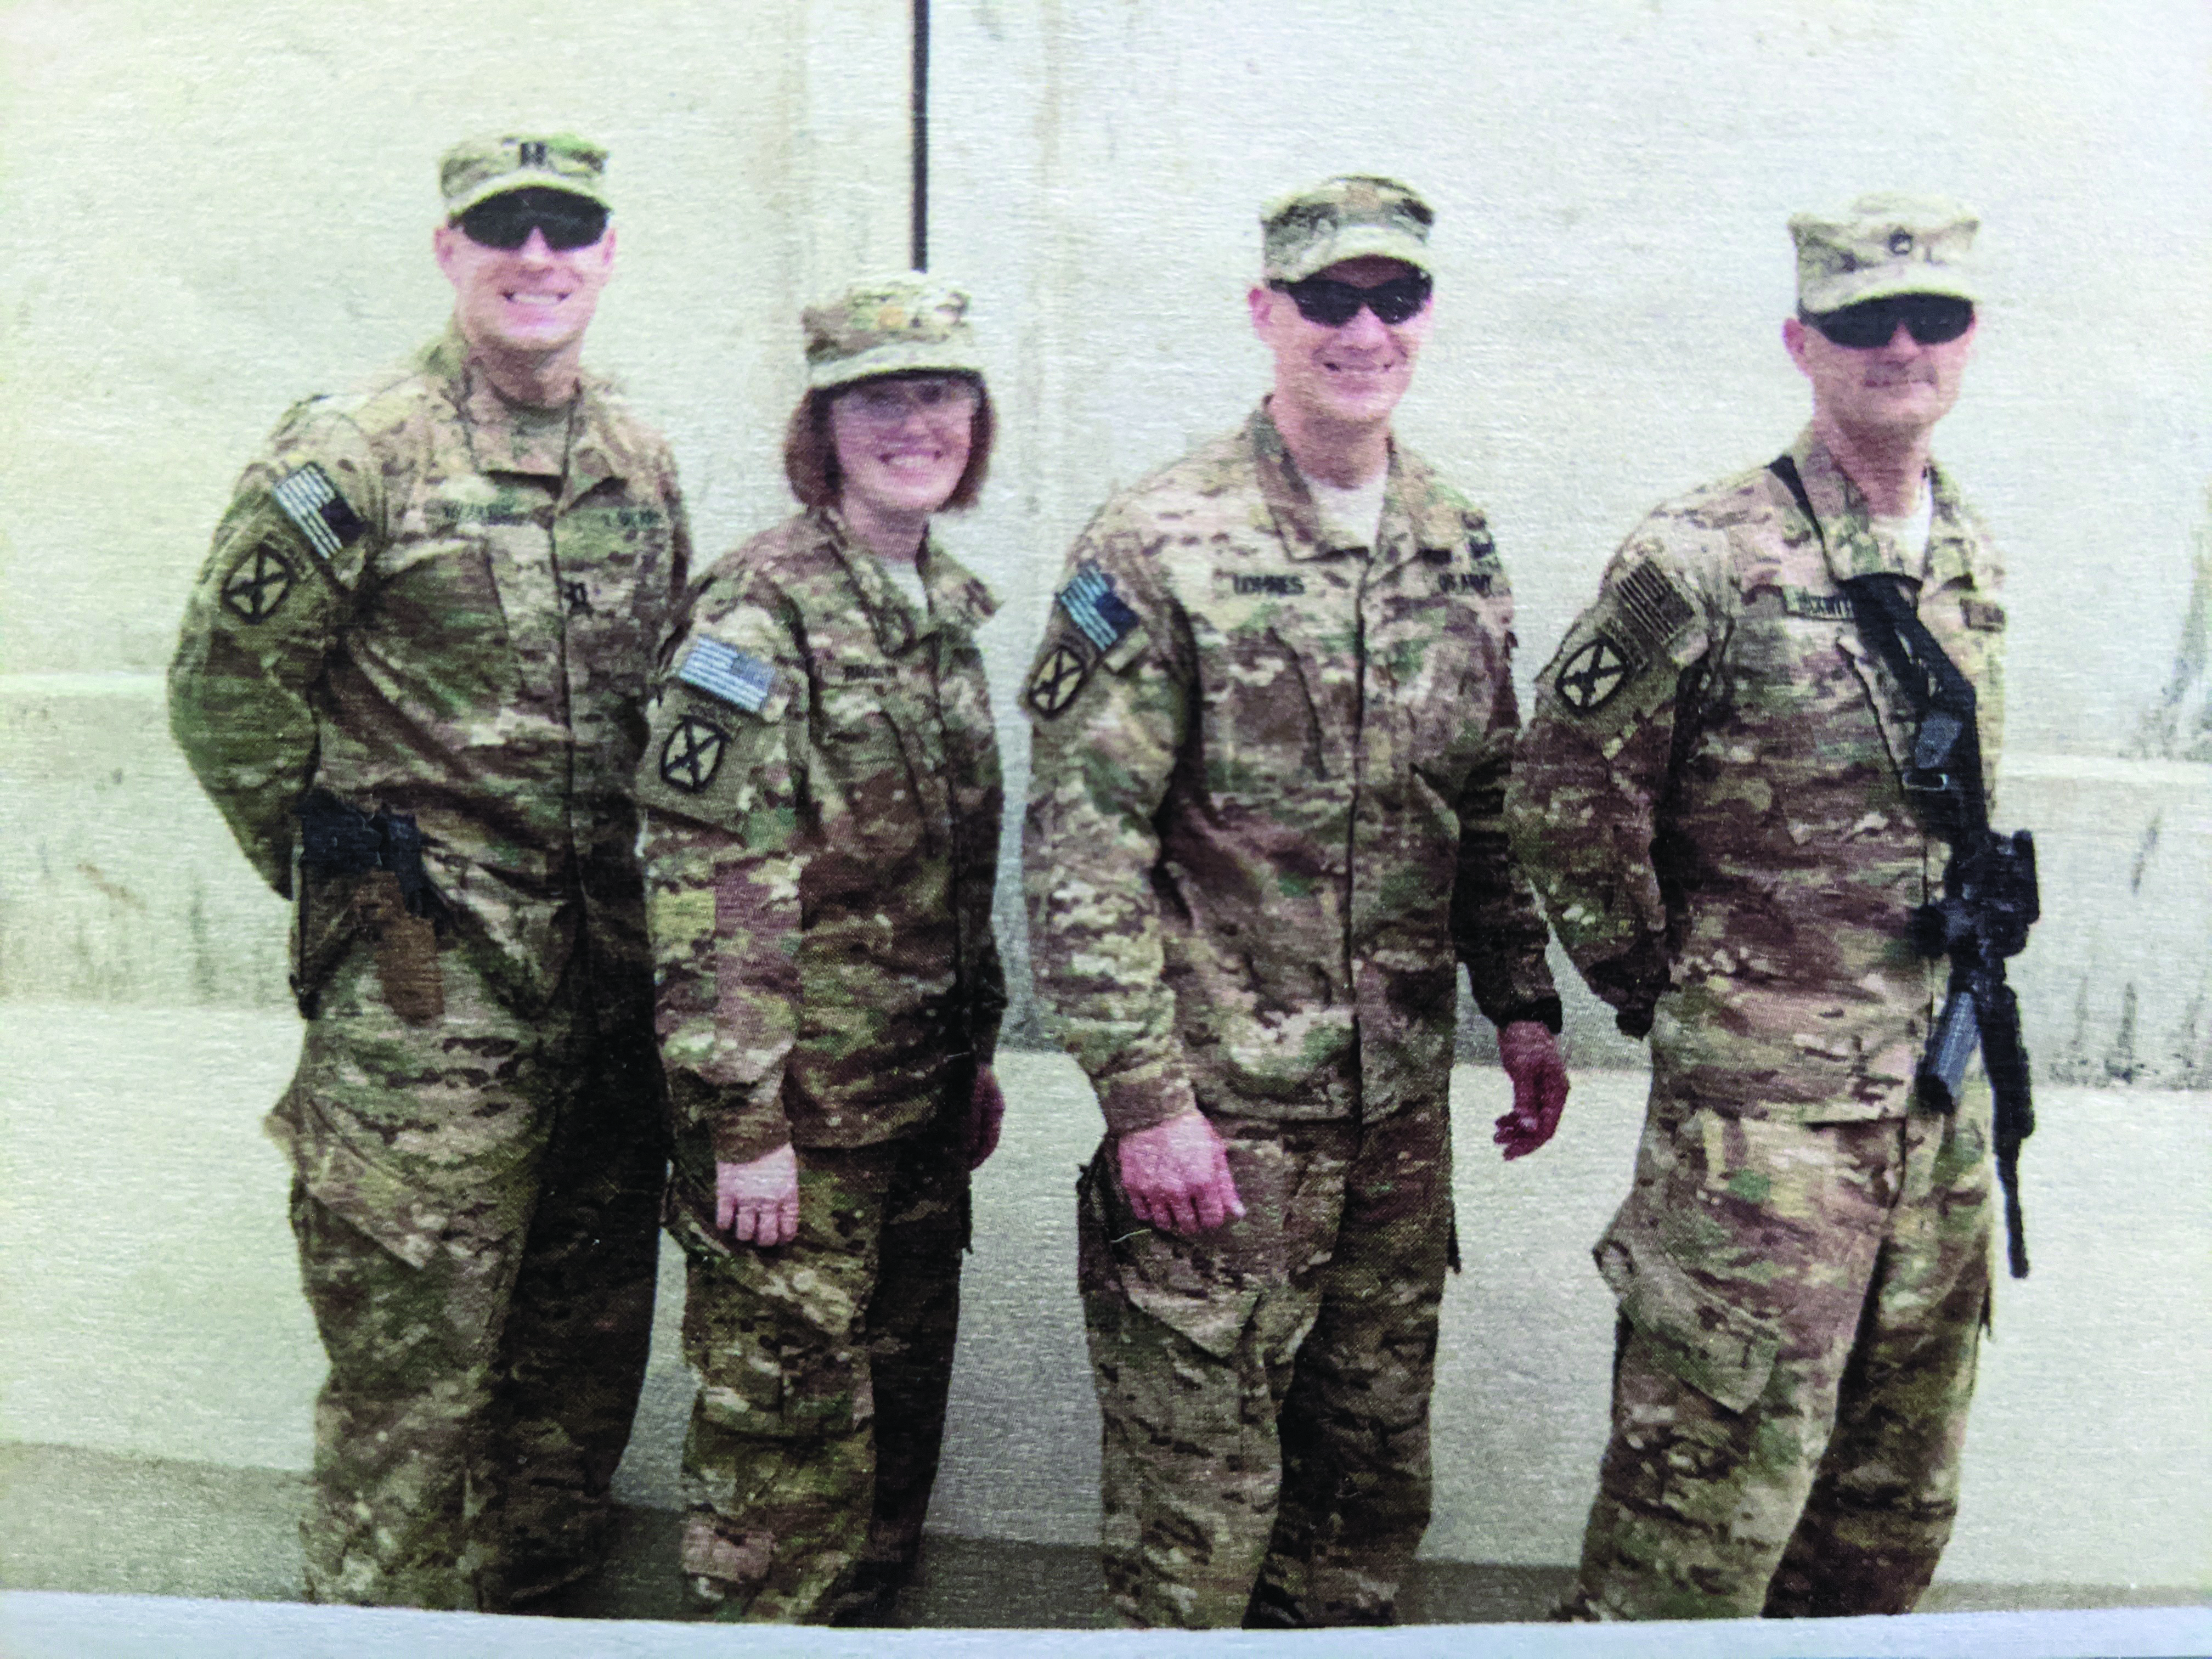 Members of the Train Advise Assist–East legal
        team pose for a group photo at Tactical Base
        Gamberi, Afghanistan. Pictured left to right: CPT
        John McGuire, MAJ Sandra Brannom, then-MAJ
        Brian Lohnes, then-SSG Tim Beckwith. (Photo
        courtesy of SFC Beckwith)